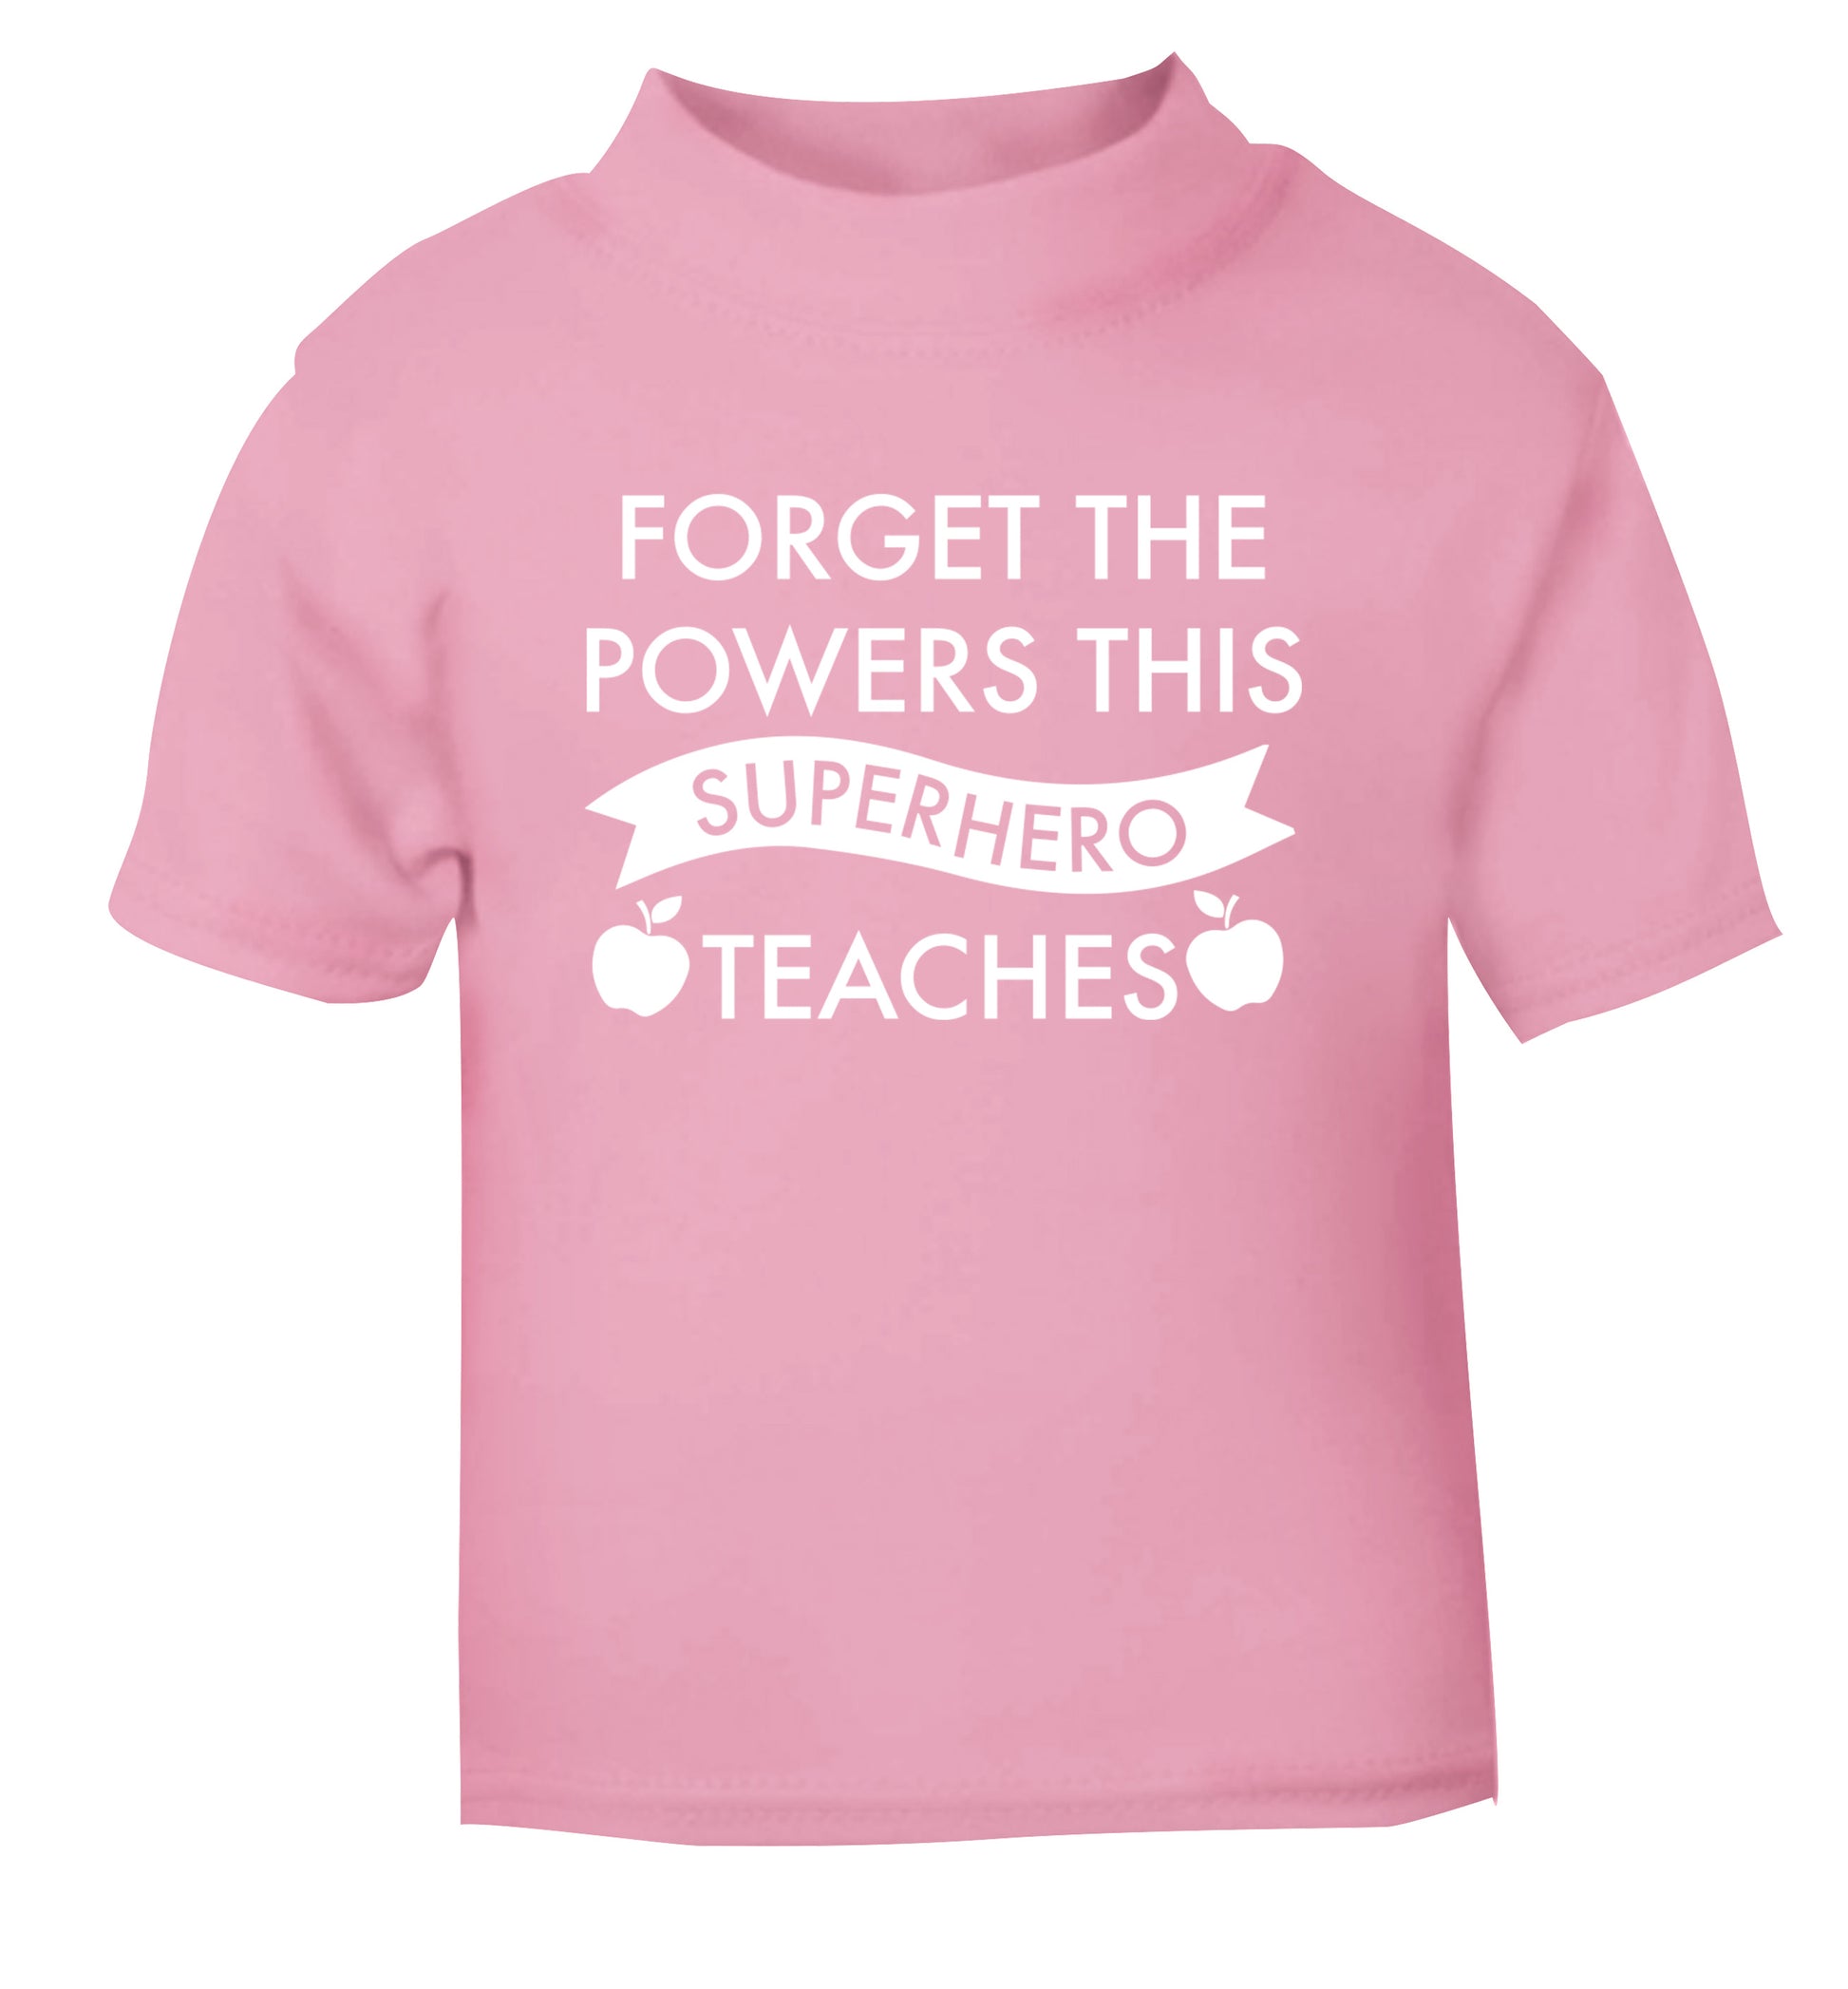 Forget the powers this superhero teaches light pink Baby Toddler Tshirt 2 Years